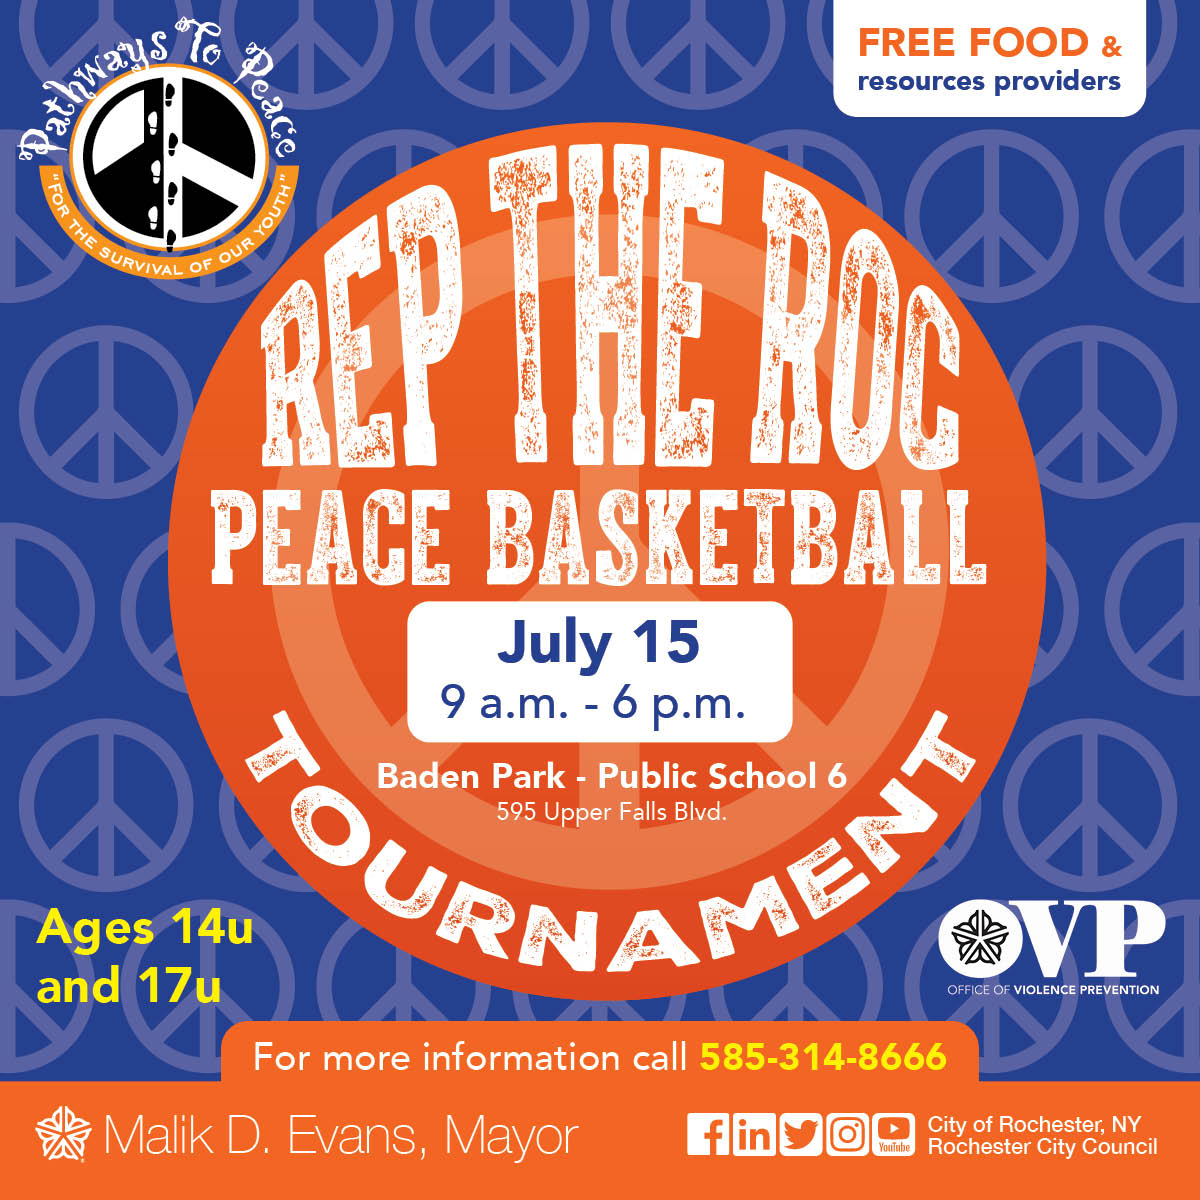 Join Pathway to Peace tomorrow, July 15, from 9am - 6pm at Baden Park for the Rep the Roc Peace Basketball Tournament. The event is open to ages 14+ and 17+. For more details and registration, please contact 585-314-8666. #RochesterNY #PathwayToPeace #ChooseWisdom